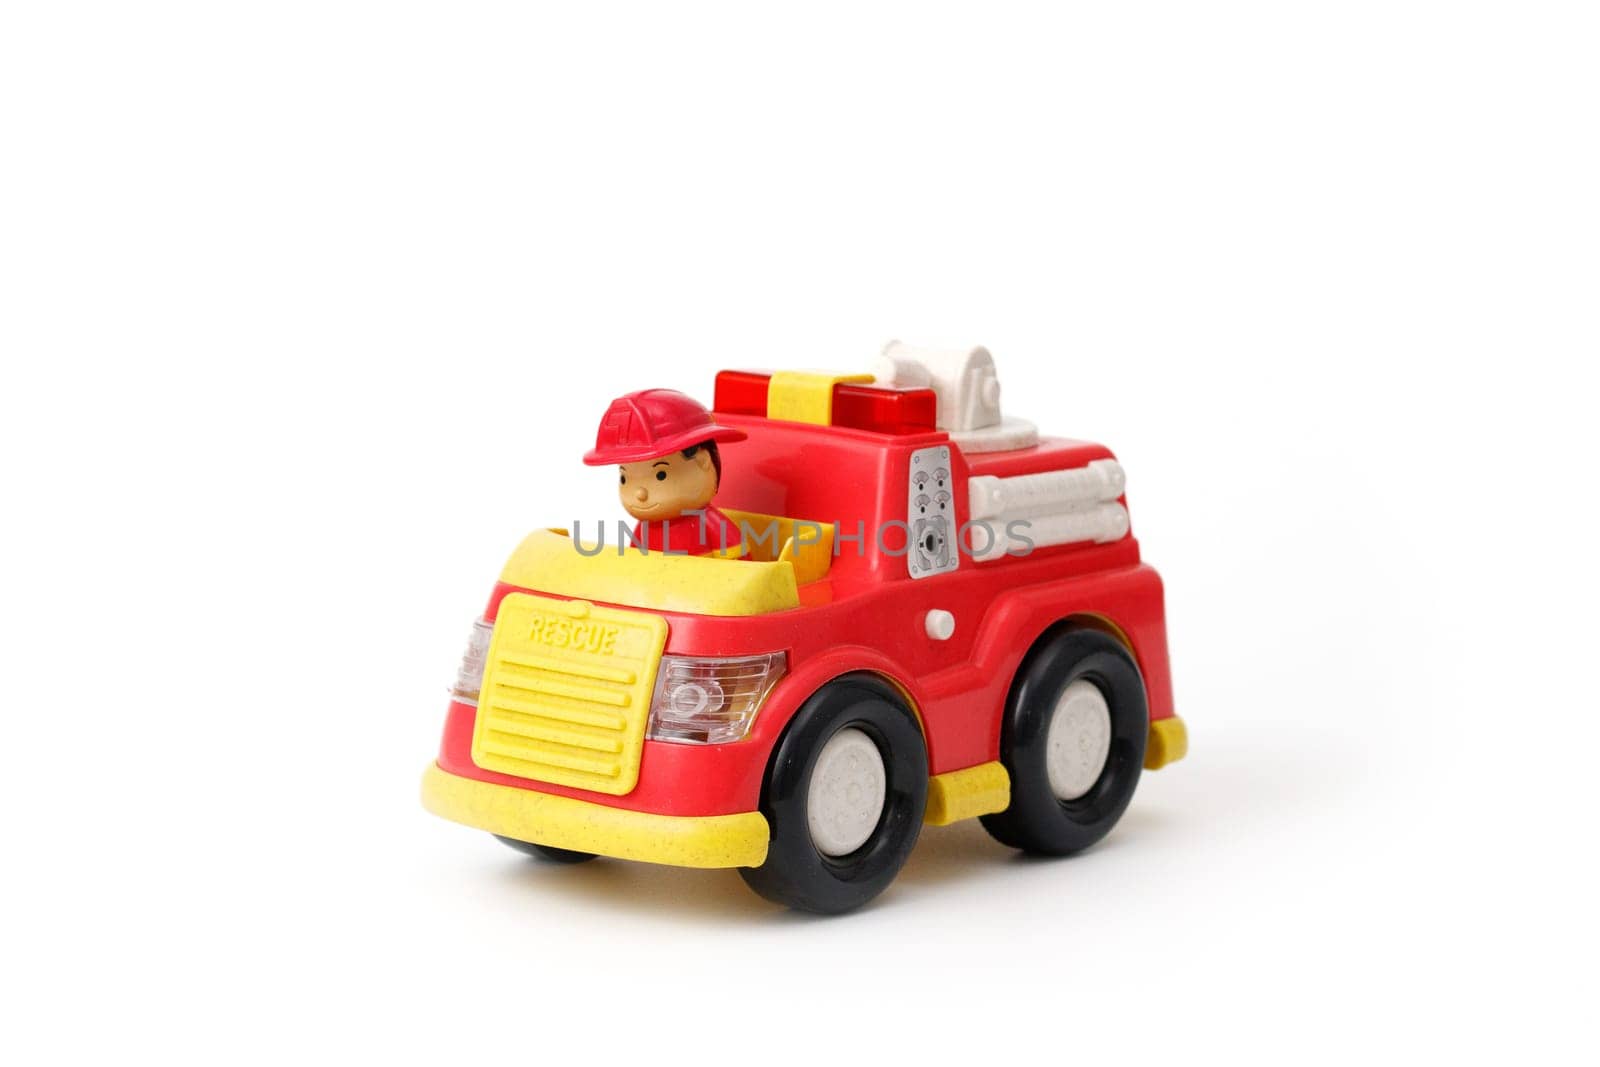 Children's toy red fire truck with driver in the cabin, isolated on white background by Rom4ek